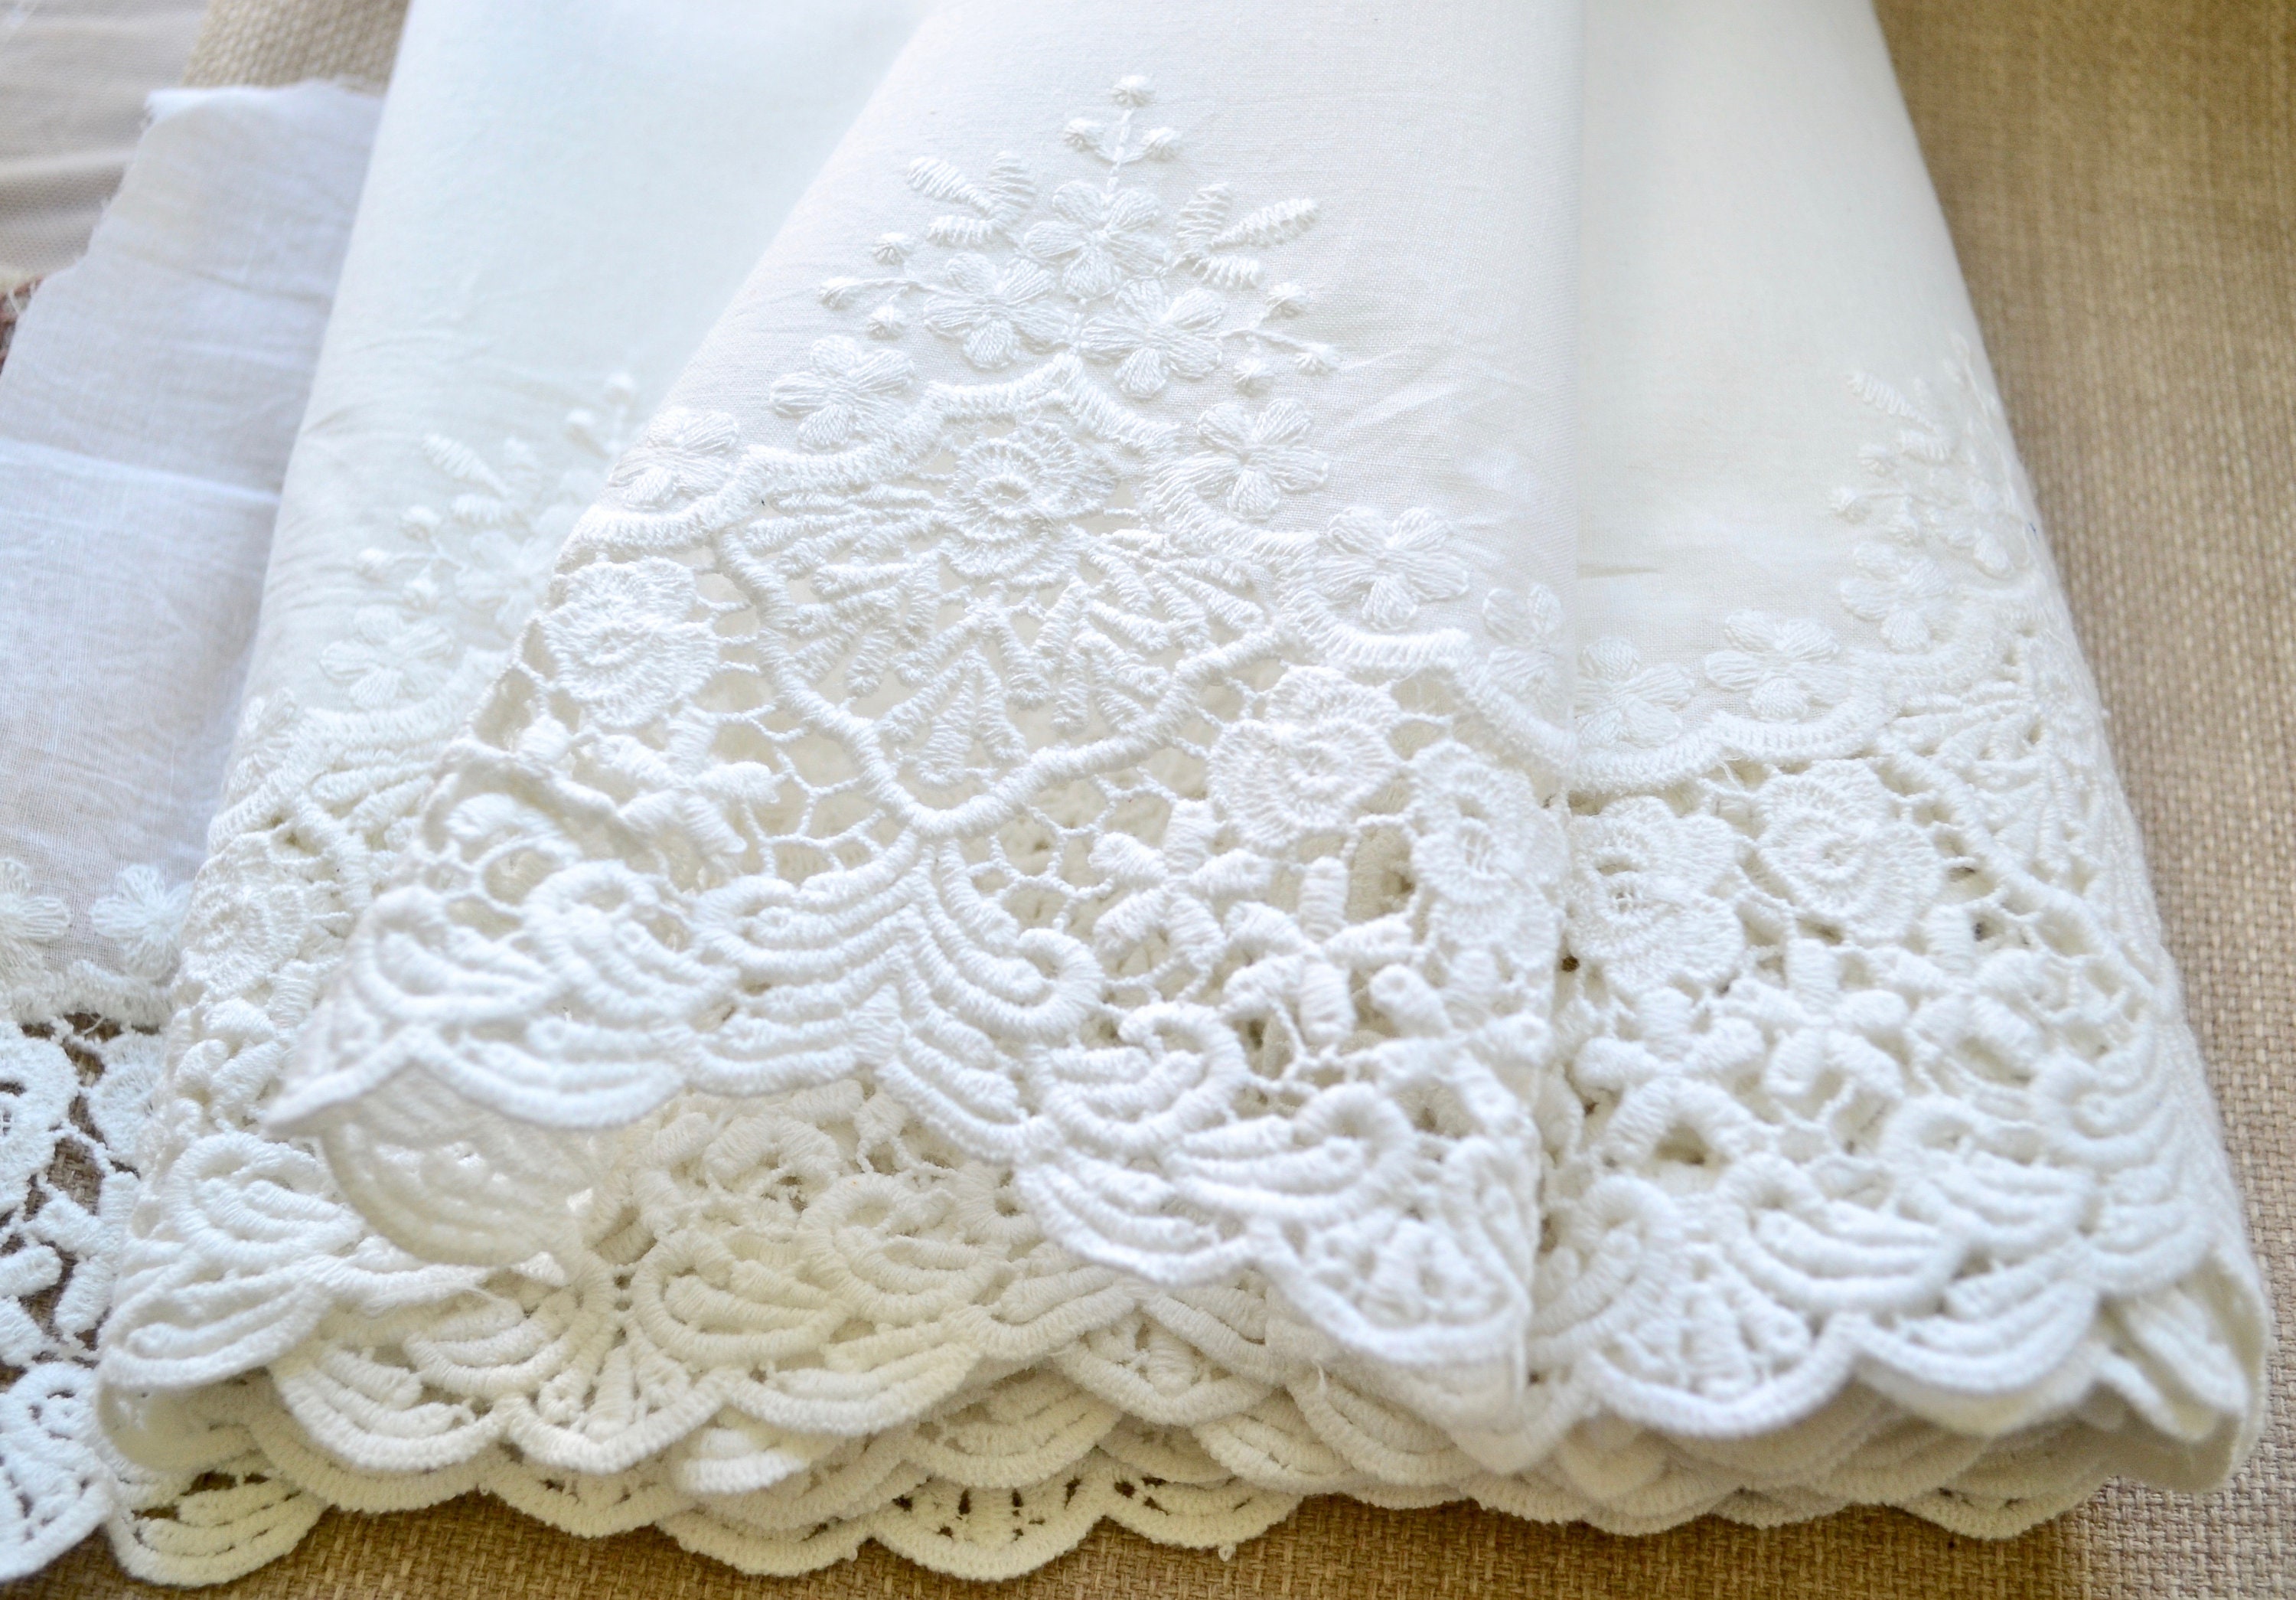 Off White Lace Fabric With Retro Floral Pattern, Bridal Lace Fabric,guipure  Lace Fabric, Crochet Lace Fabric, Venise Lace Fabric 